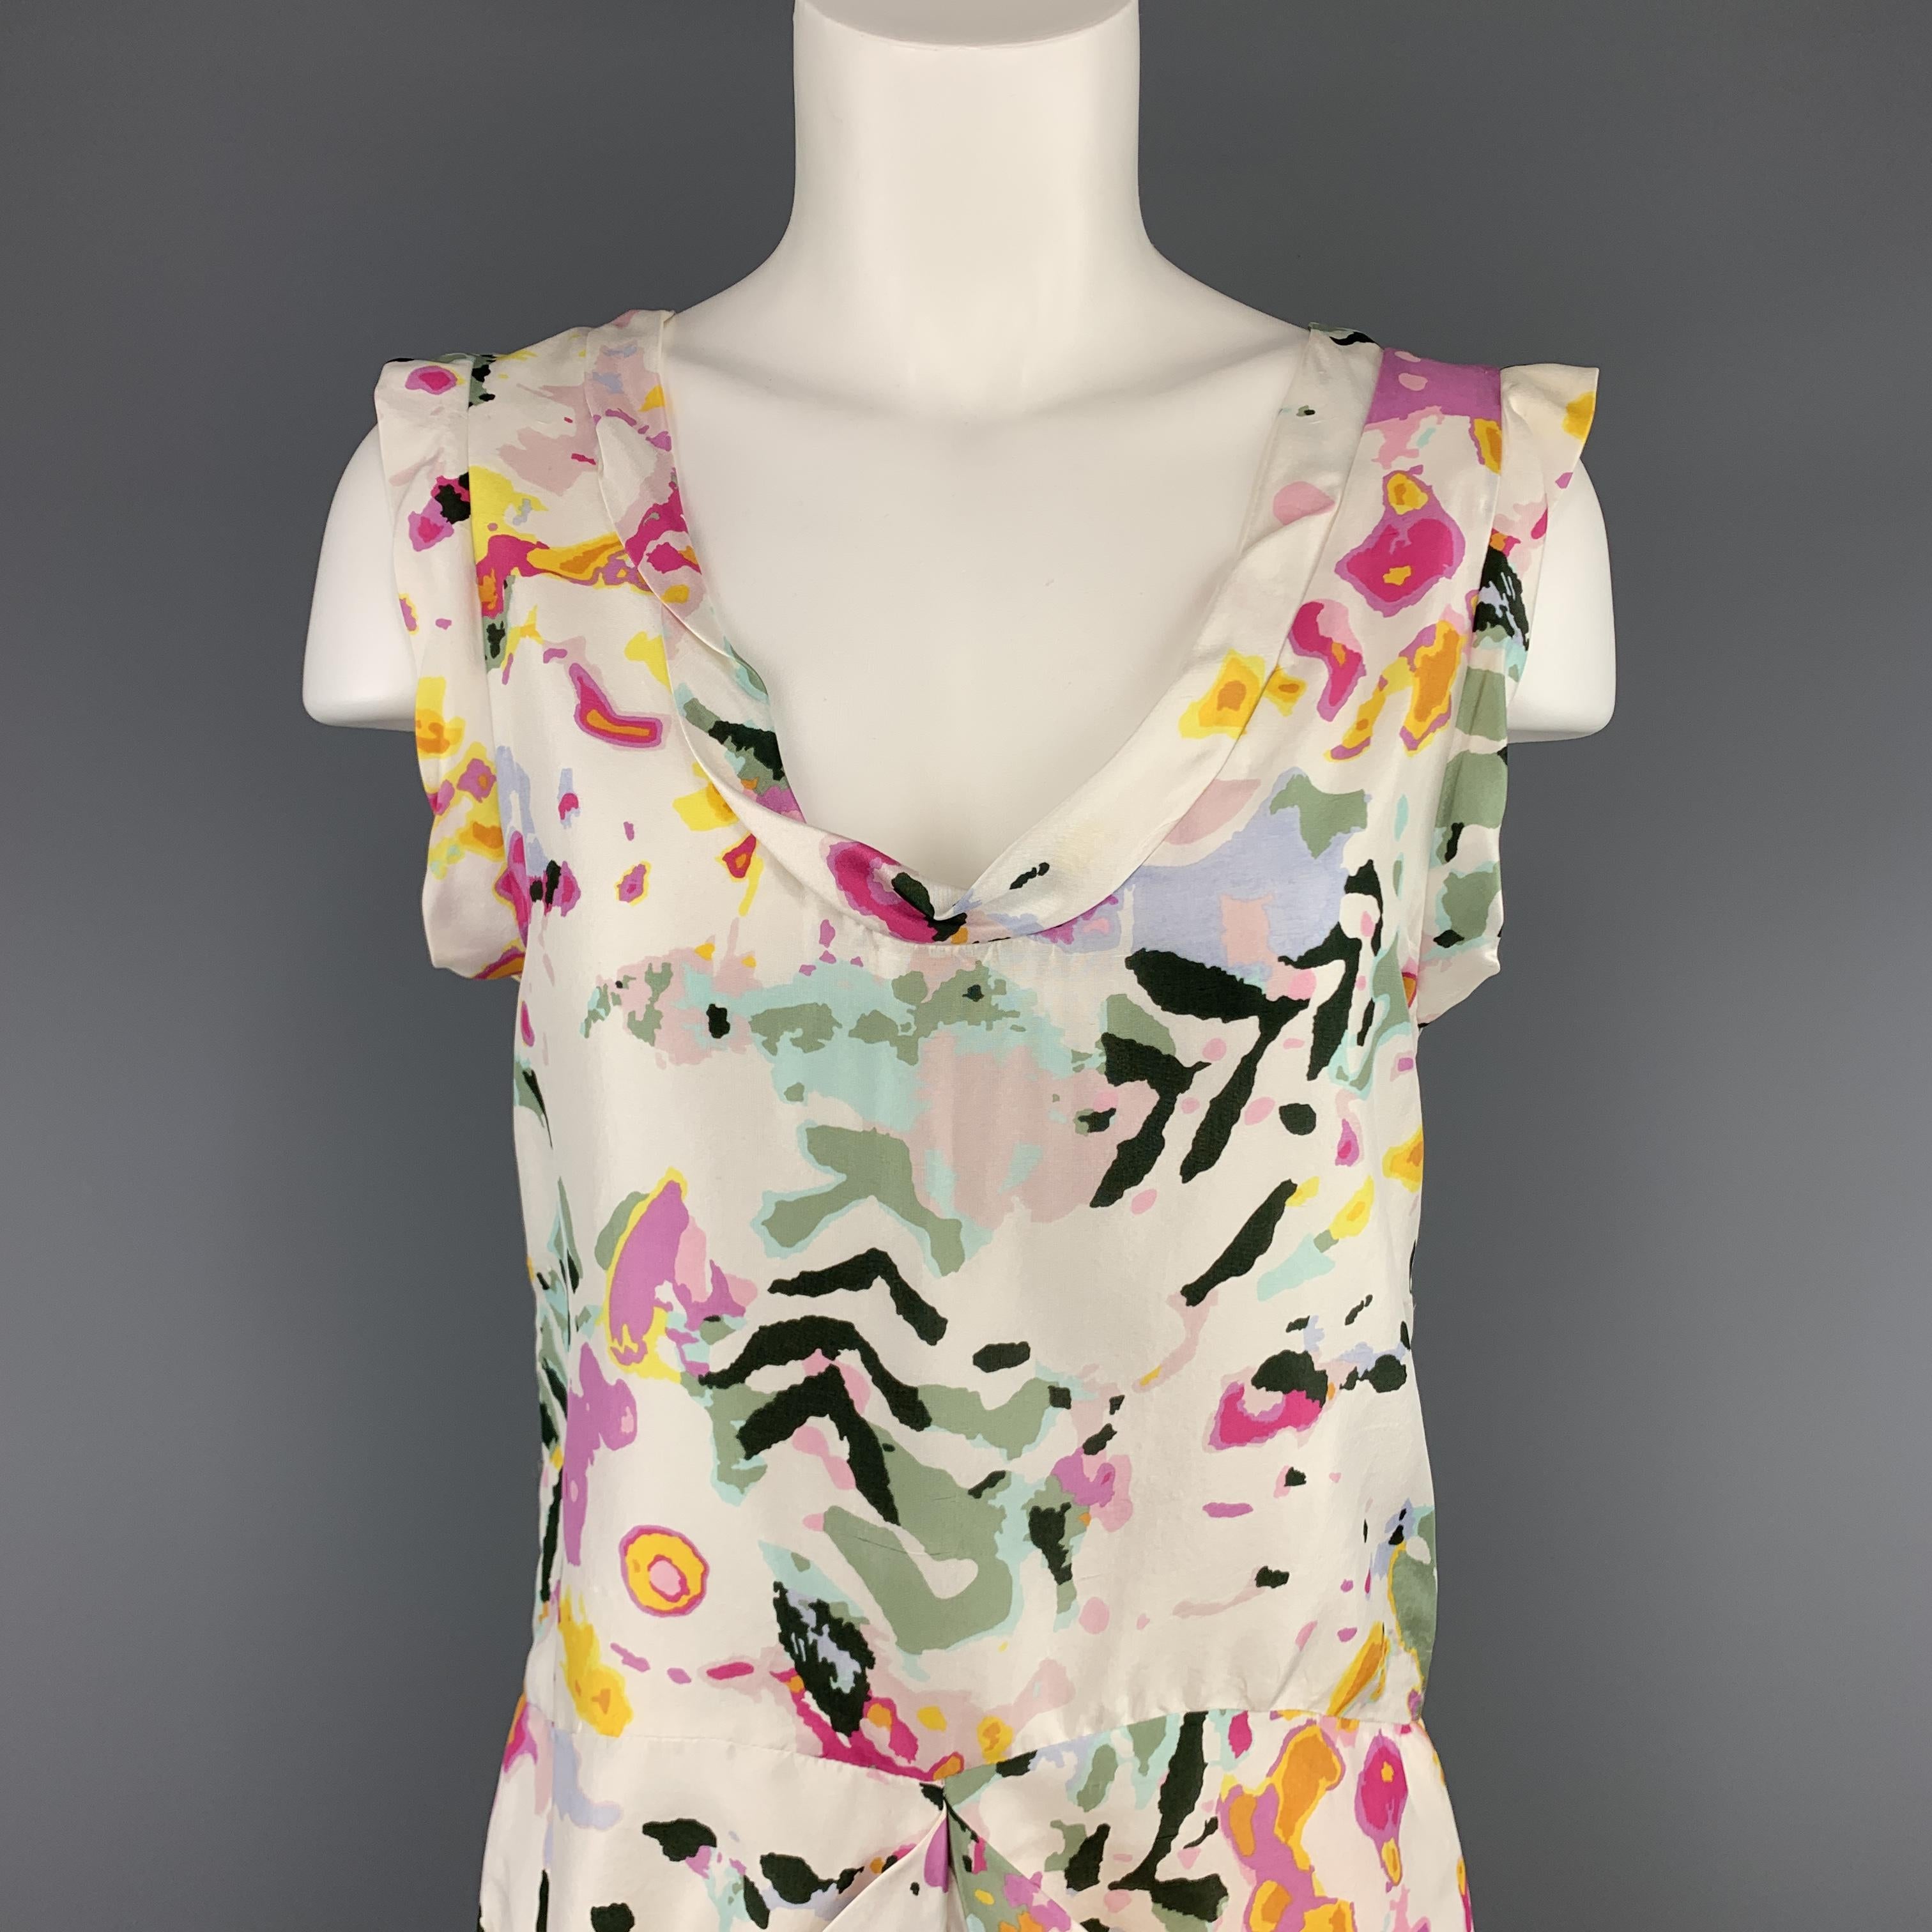 THAKOON shift dress comes in white silk satin with multi color floral print, scoop ruffle accent trim neckline, and draped mock pocket front. Made in USA.
 
Excellent Pre-Owned Condition.
Marked: 4
 
Measurements:
 
Shoulder: 16 in.
Bust: 34